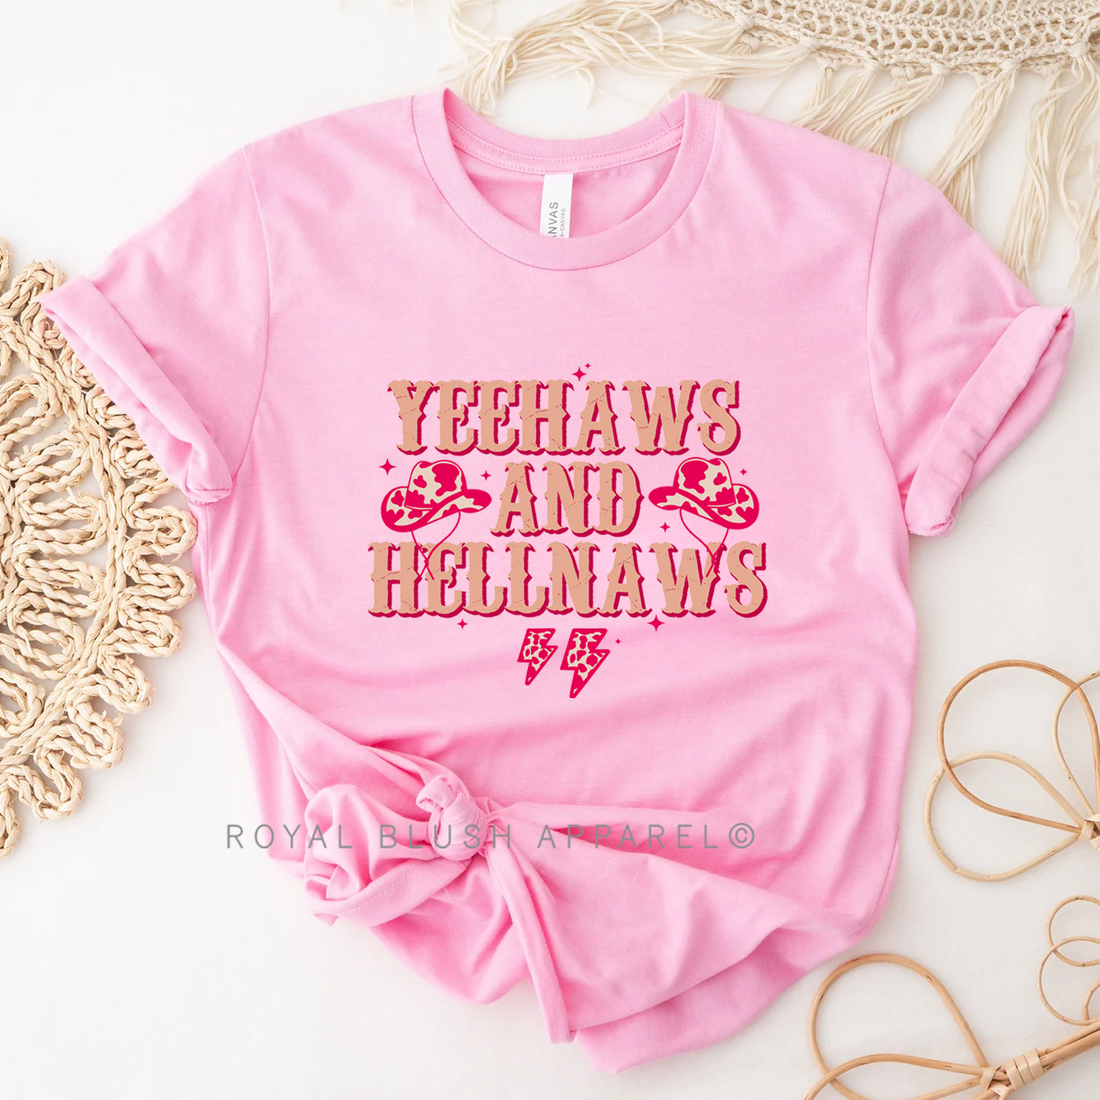 Yeehaws And Hellnaws Relaxed Unisex T-shirt